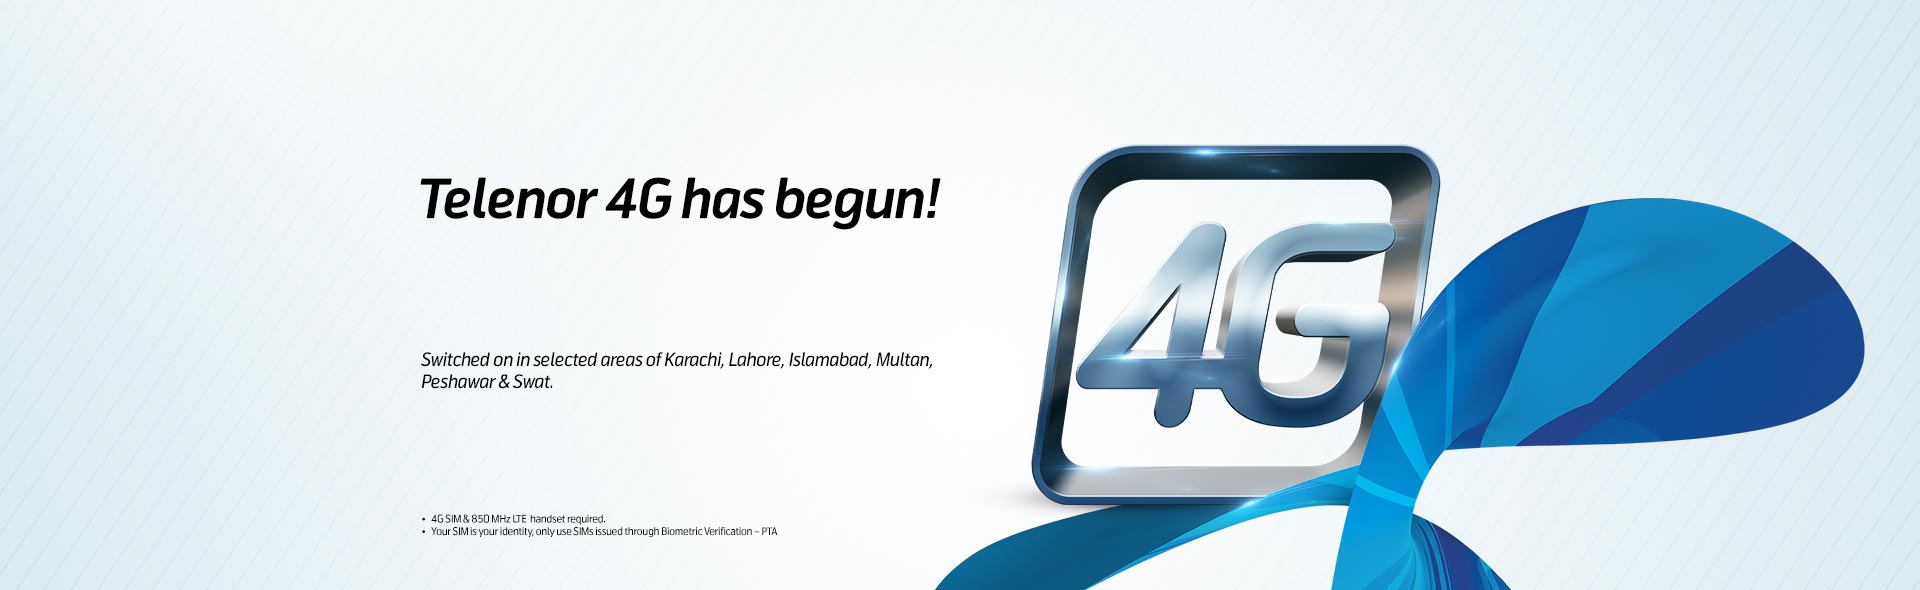 4G Services Launched By Telenor  